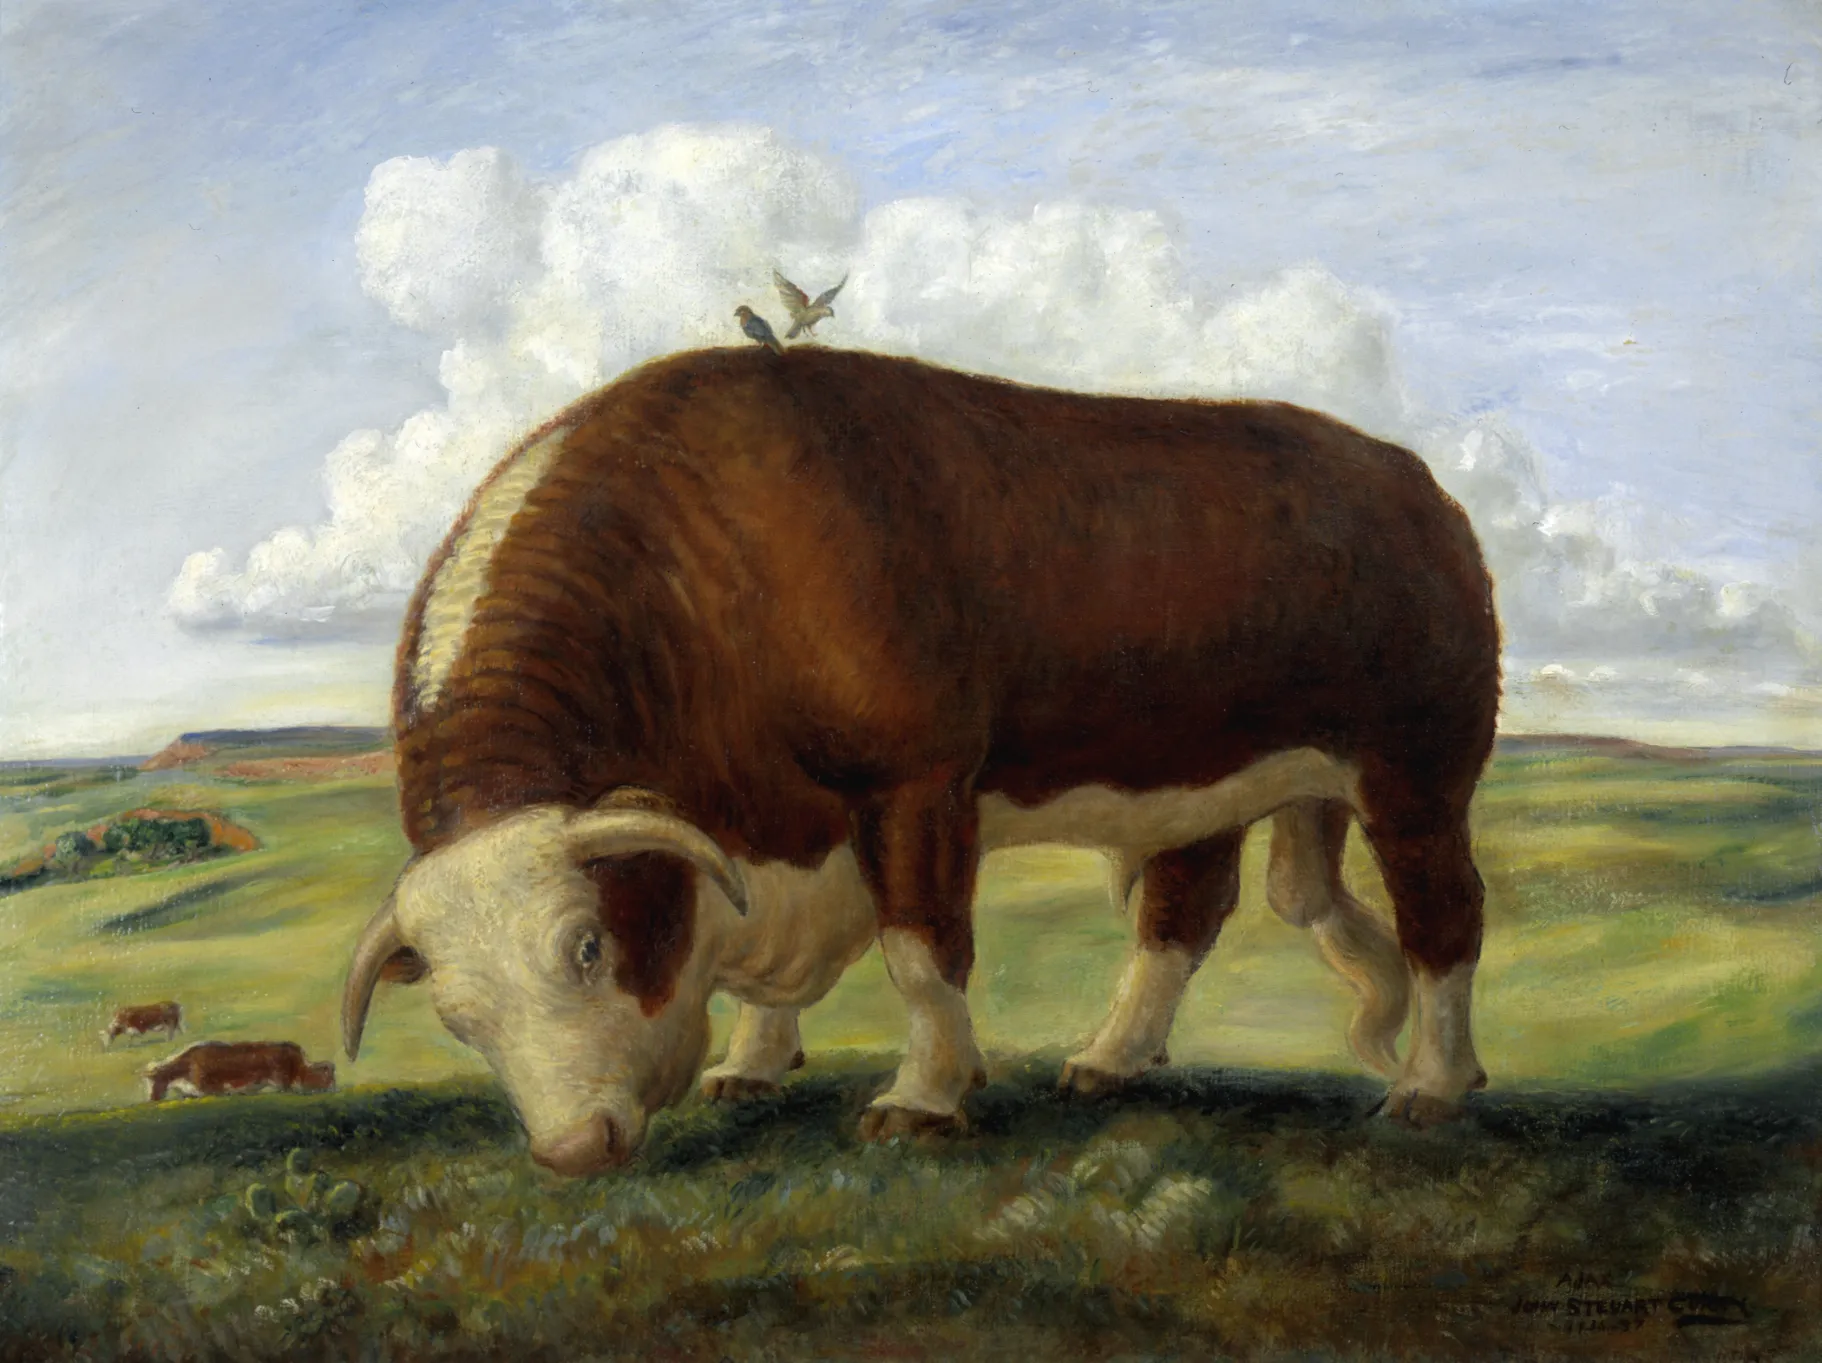 A prize bull is grazing contentedly with cowbirds feeding on his back. The image references the myth of Ajax and suggests the cows might get their revenge. Curry painted a scene of green pastures and fat cattle to reassure Americans during the Dust Bowl years